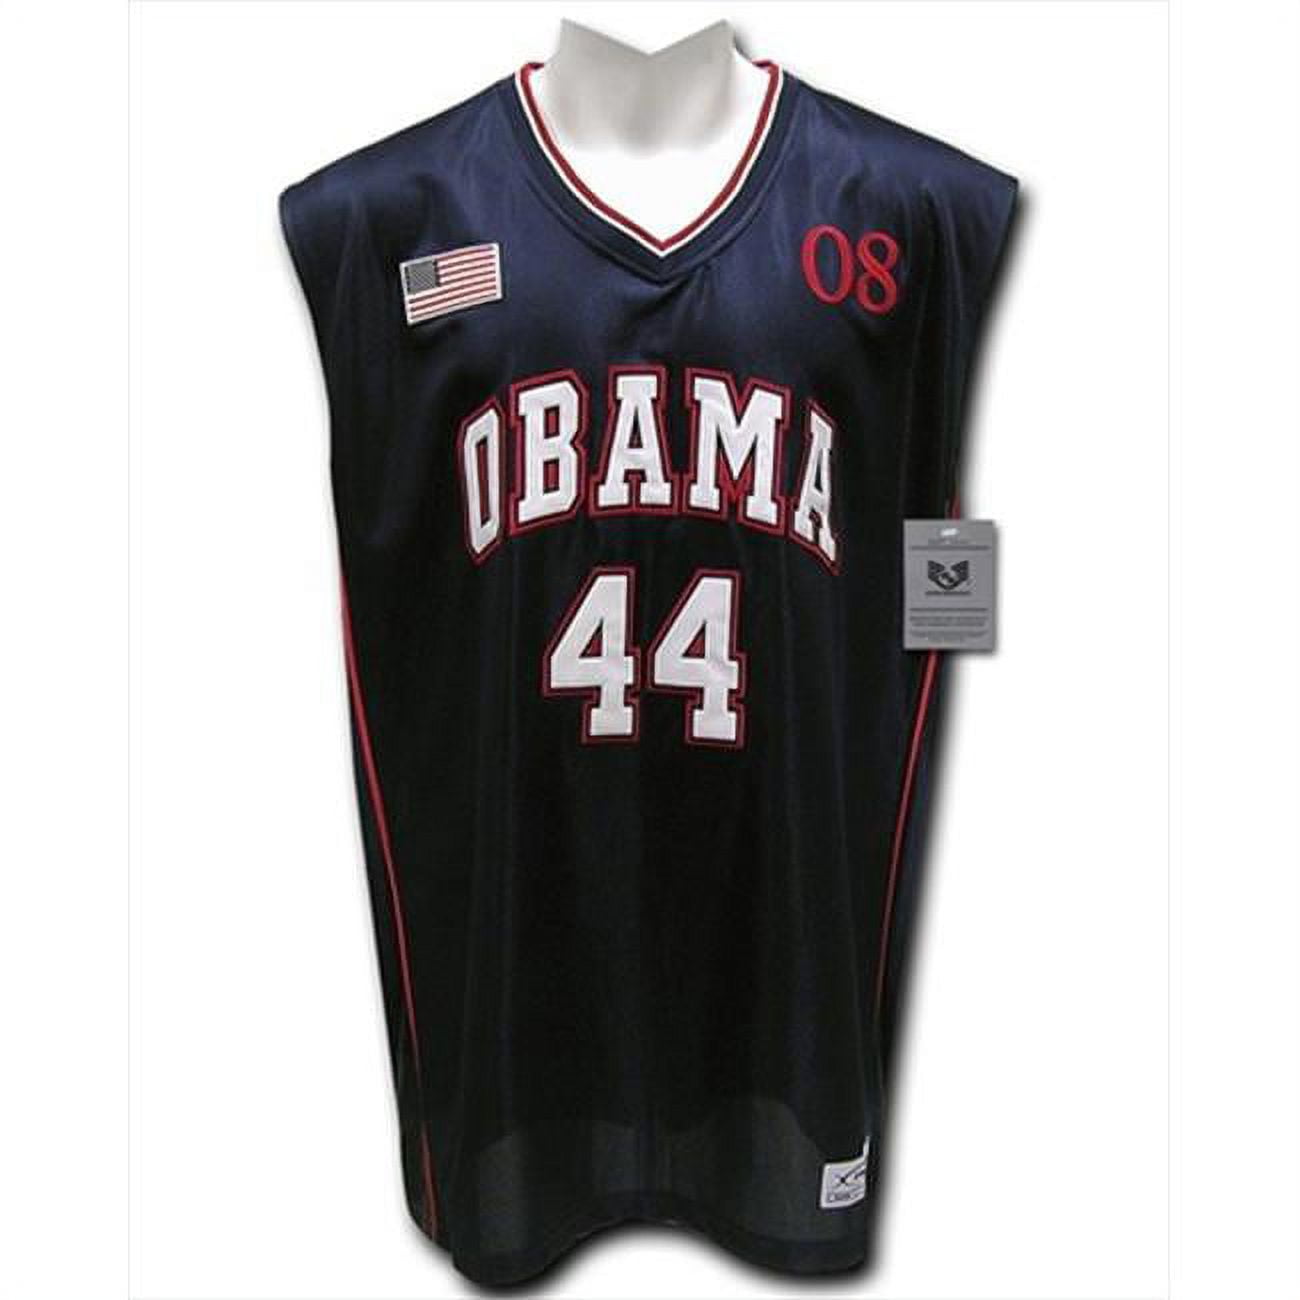 Rapid Dominance R08-OBM-WHT-03 Presidential Basketball Jersey White Large